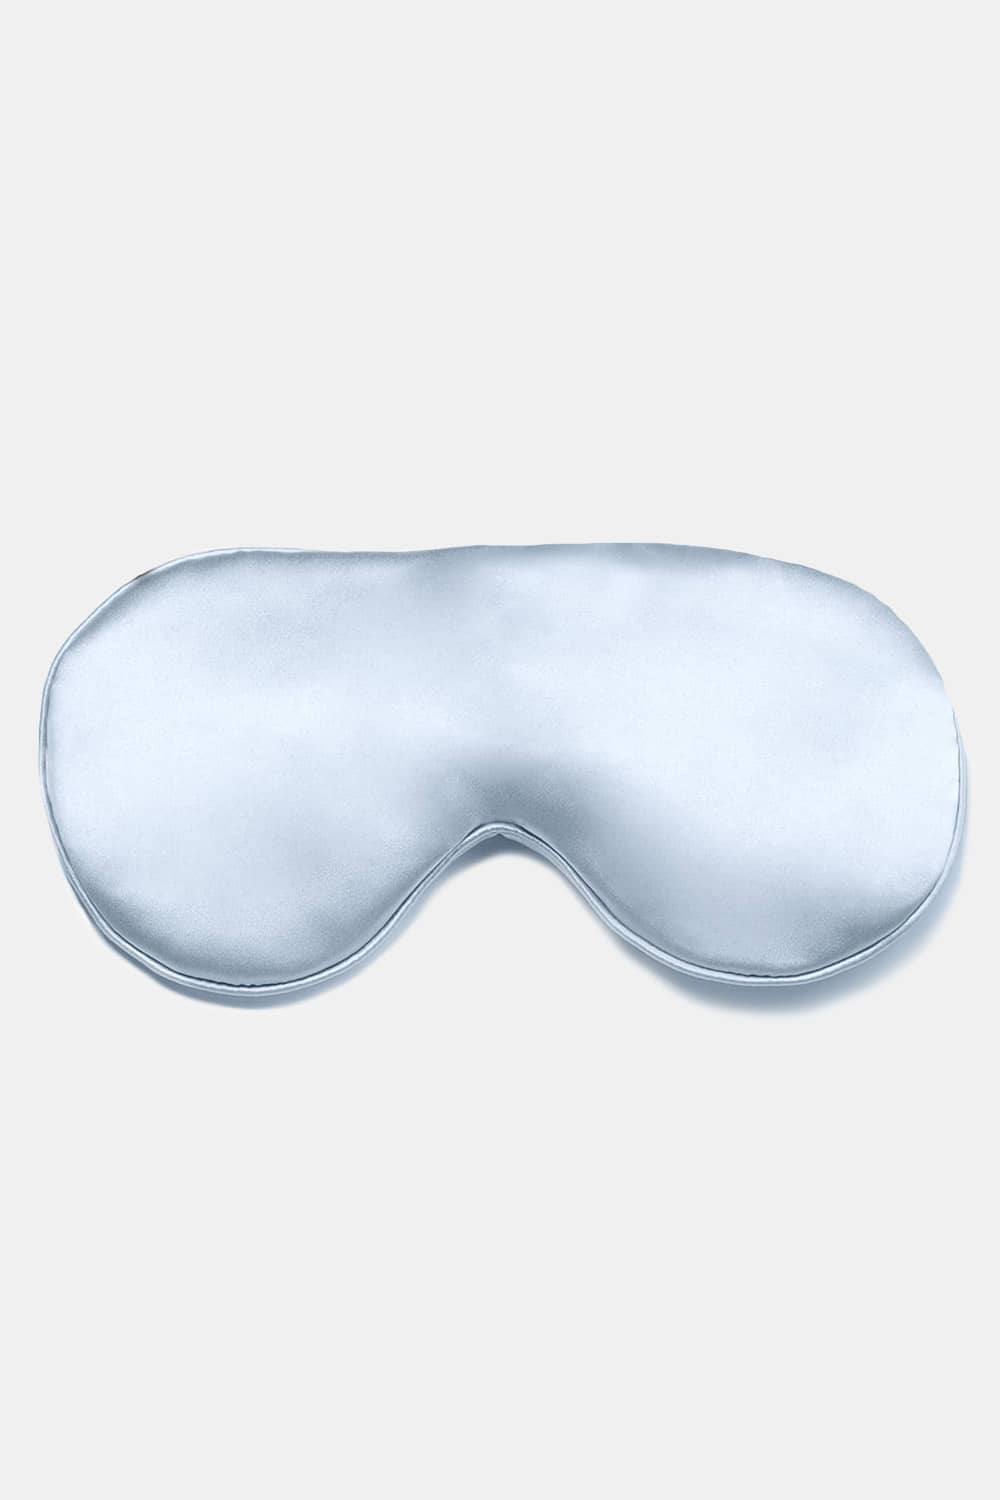 100% Mulberry Silk Therapeutic Sleep Mask - 25 Momme Beauty>Masks Fishers Finery Blue